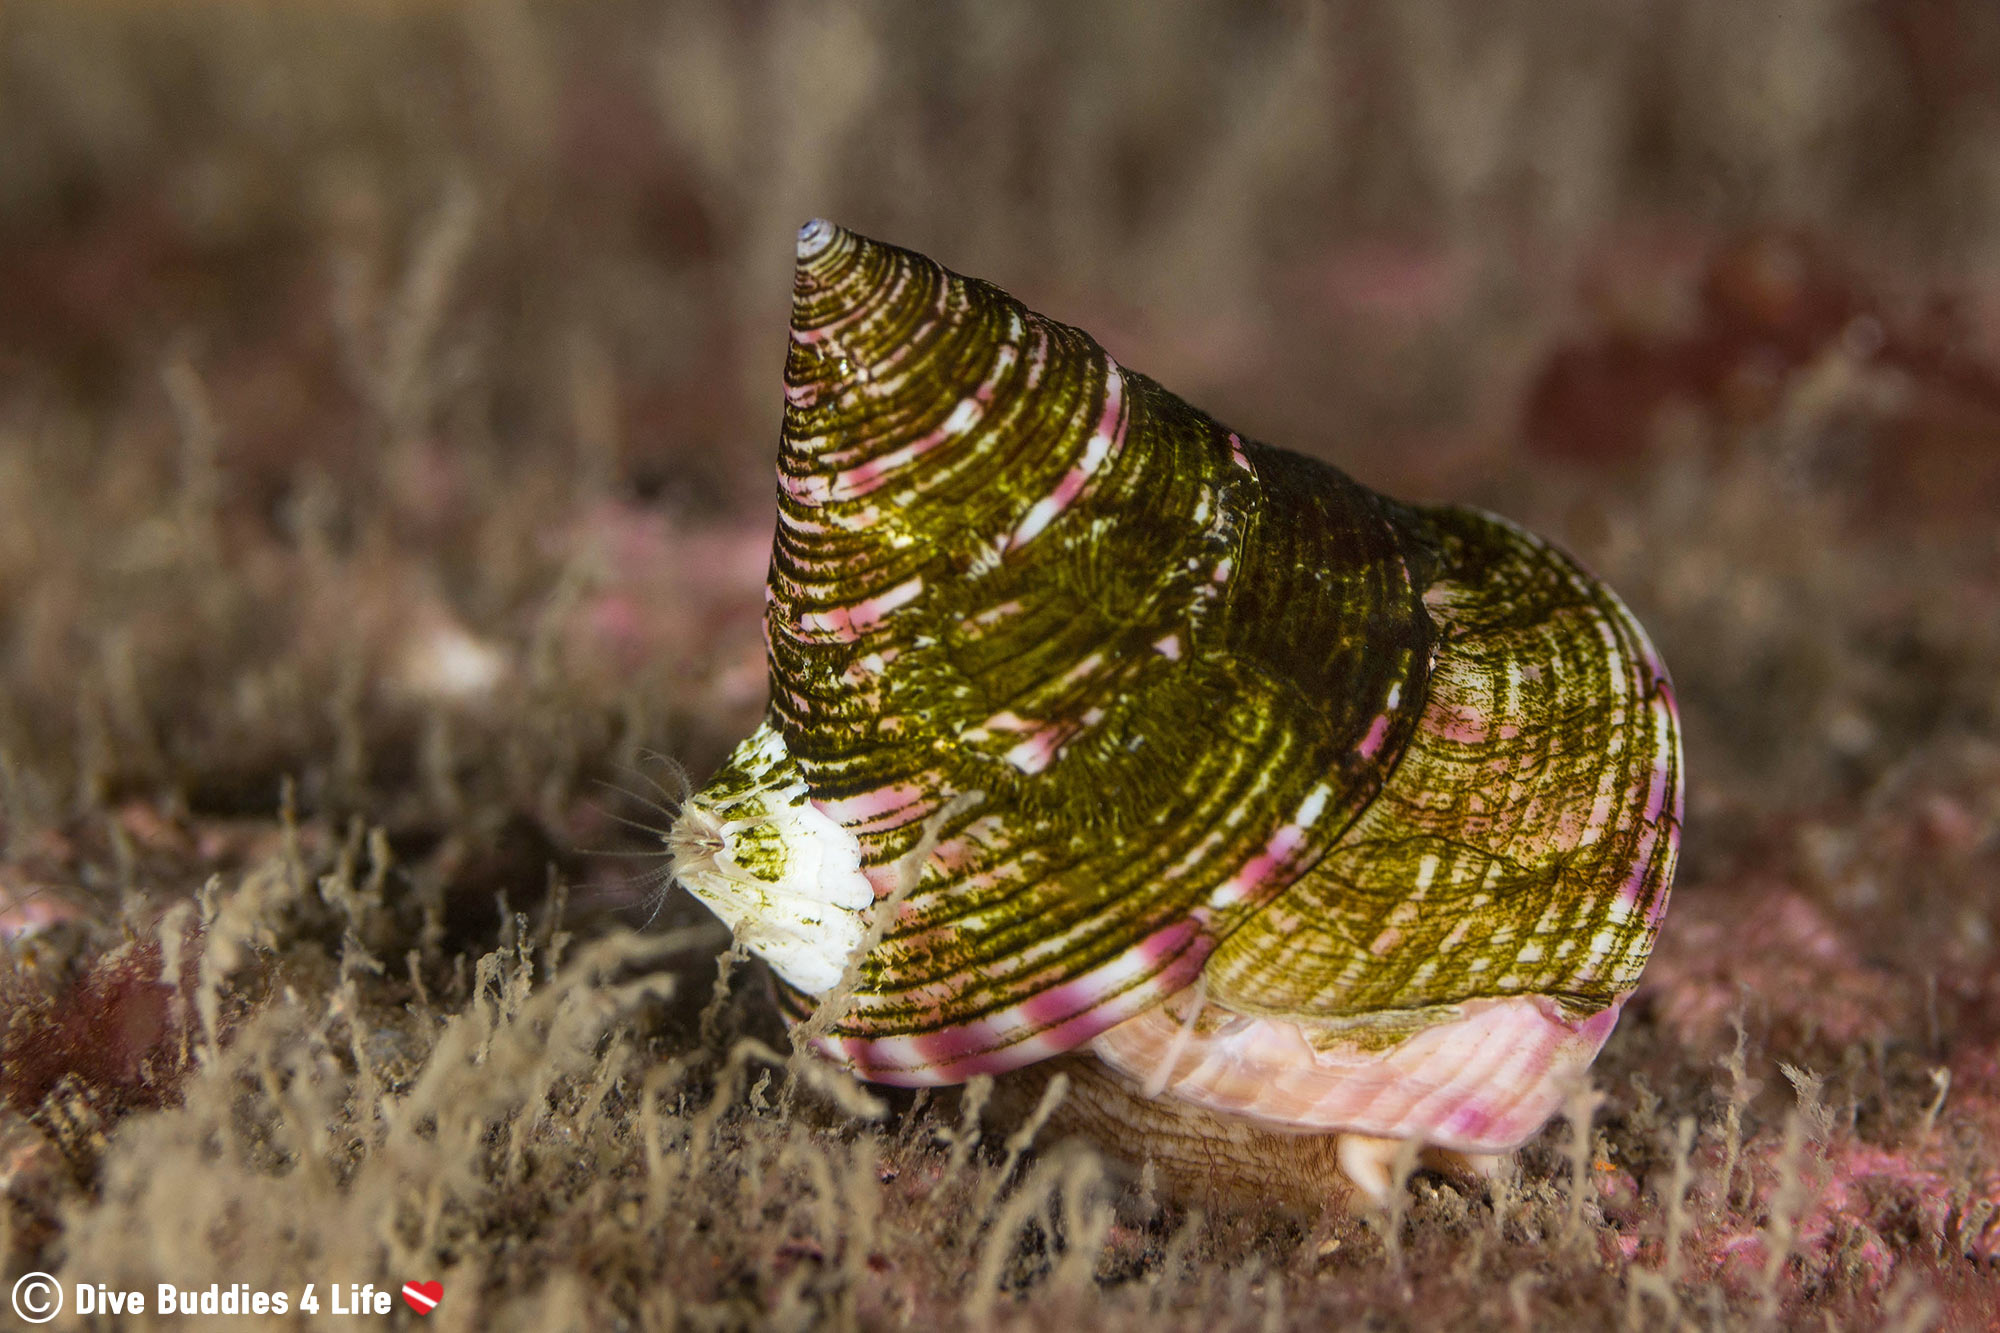 The Side Profile Of A Trochus Snail In St Abbs, Scuba Diving Scotland